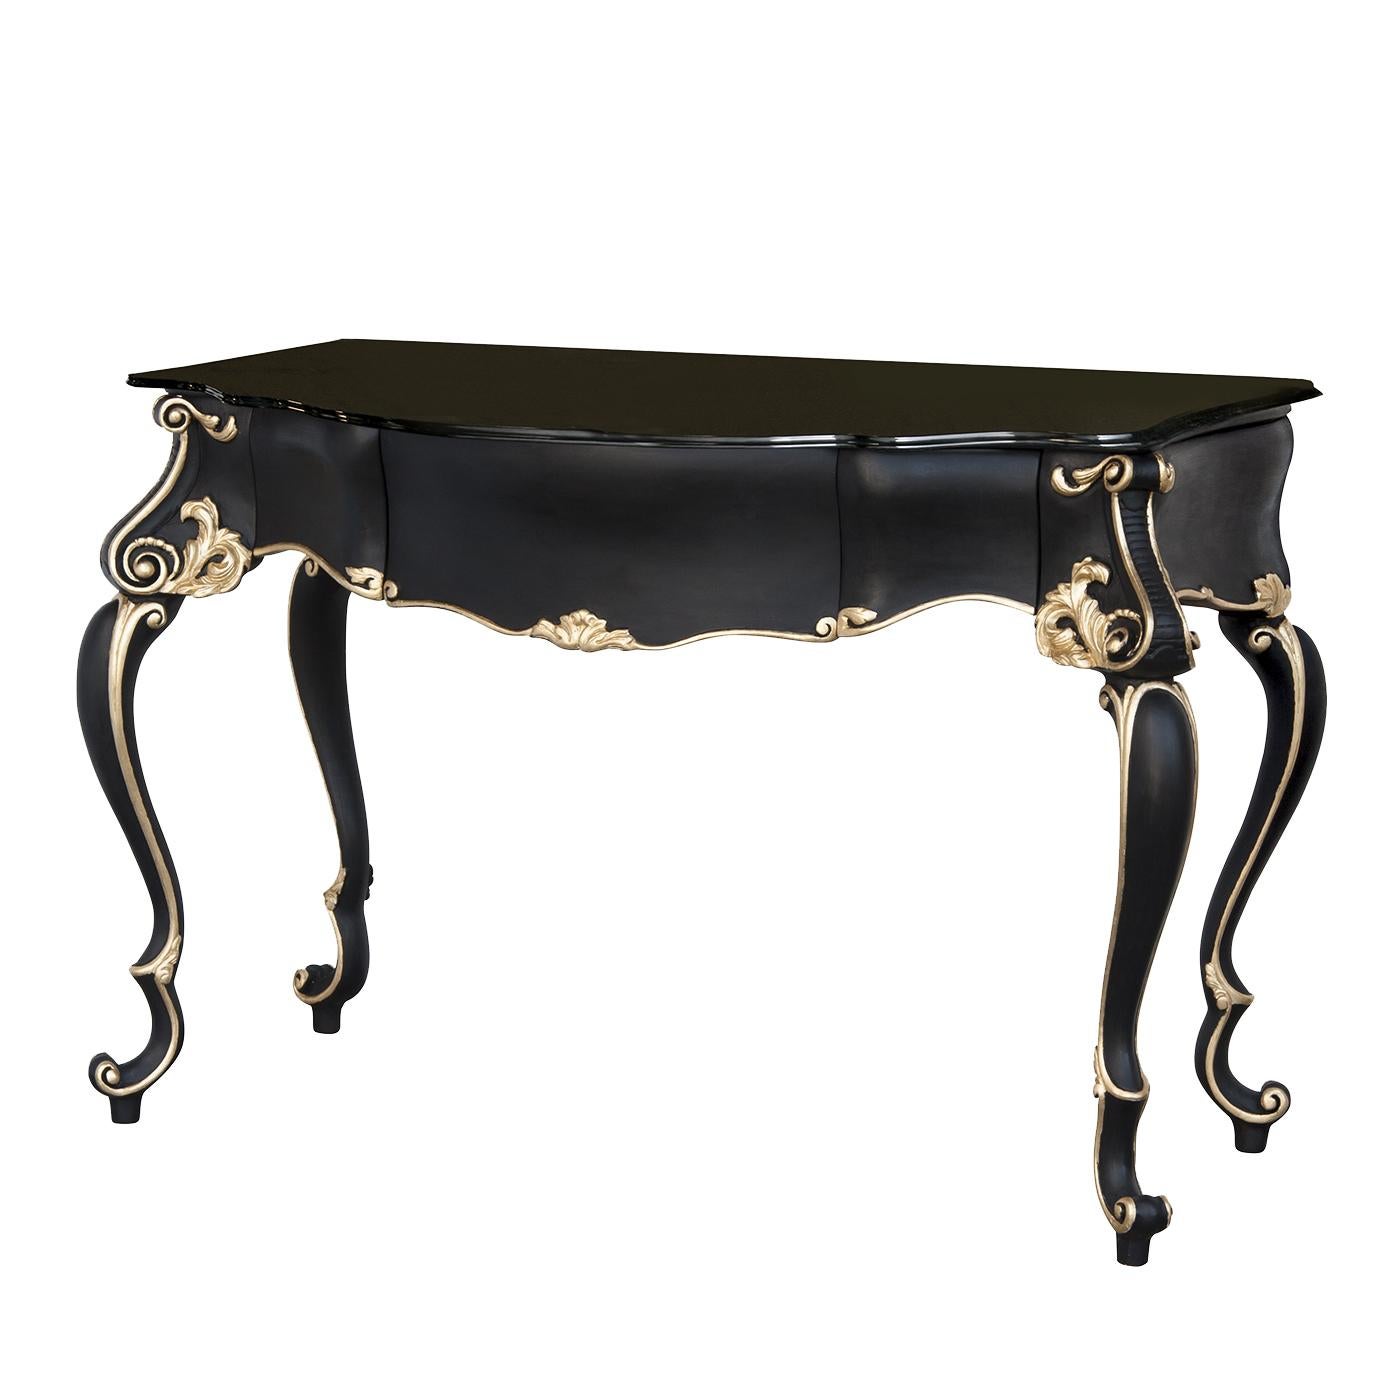 This splendid console, inspired by the bold style of Baroque art, was crafted of solid wood that was carved by hand and finished with an elegant matte black with details in gold leaf. The top is in precious black Marquina marble. A stunning addition